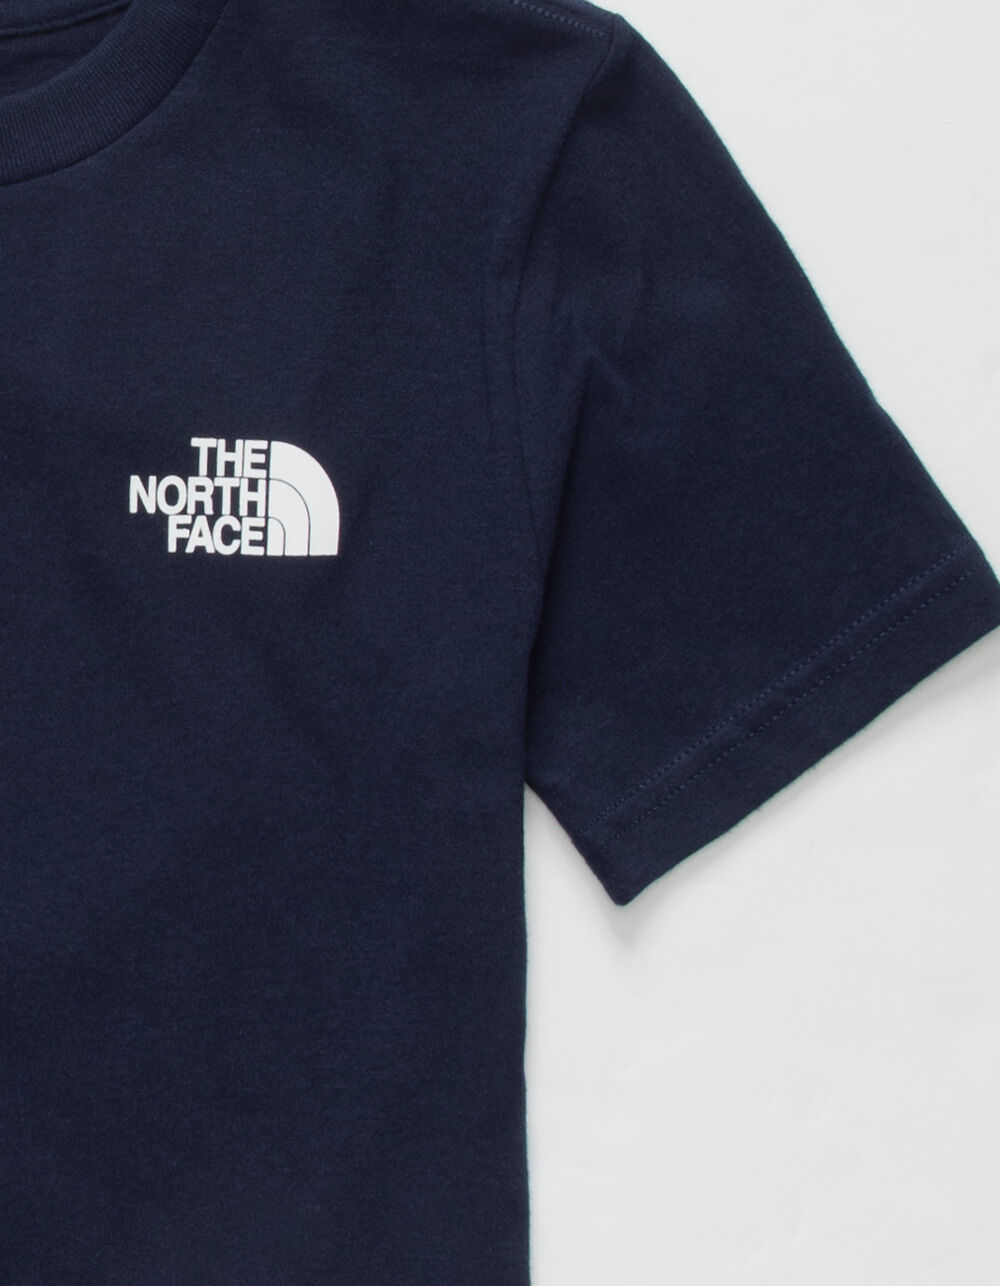 THE NORTH FACE Red Box Red Ink Little Boys Tee (4-7) - NAVY | Tillys